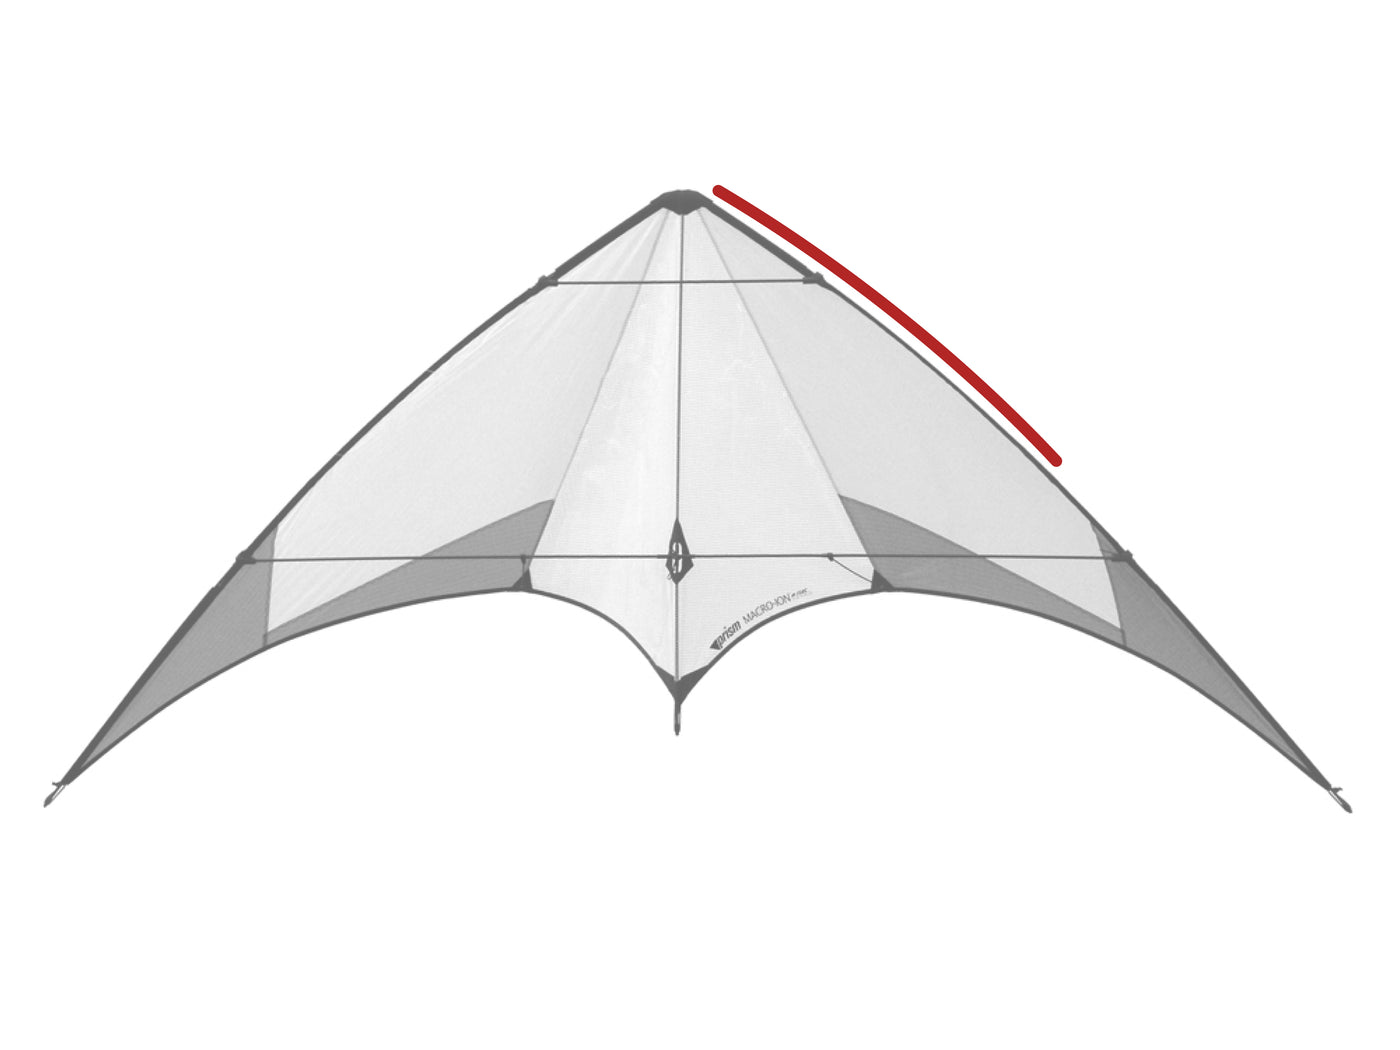 Diagram showing location of the Macro Ion Upper Leading Edge on the kite.